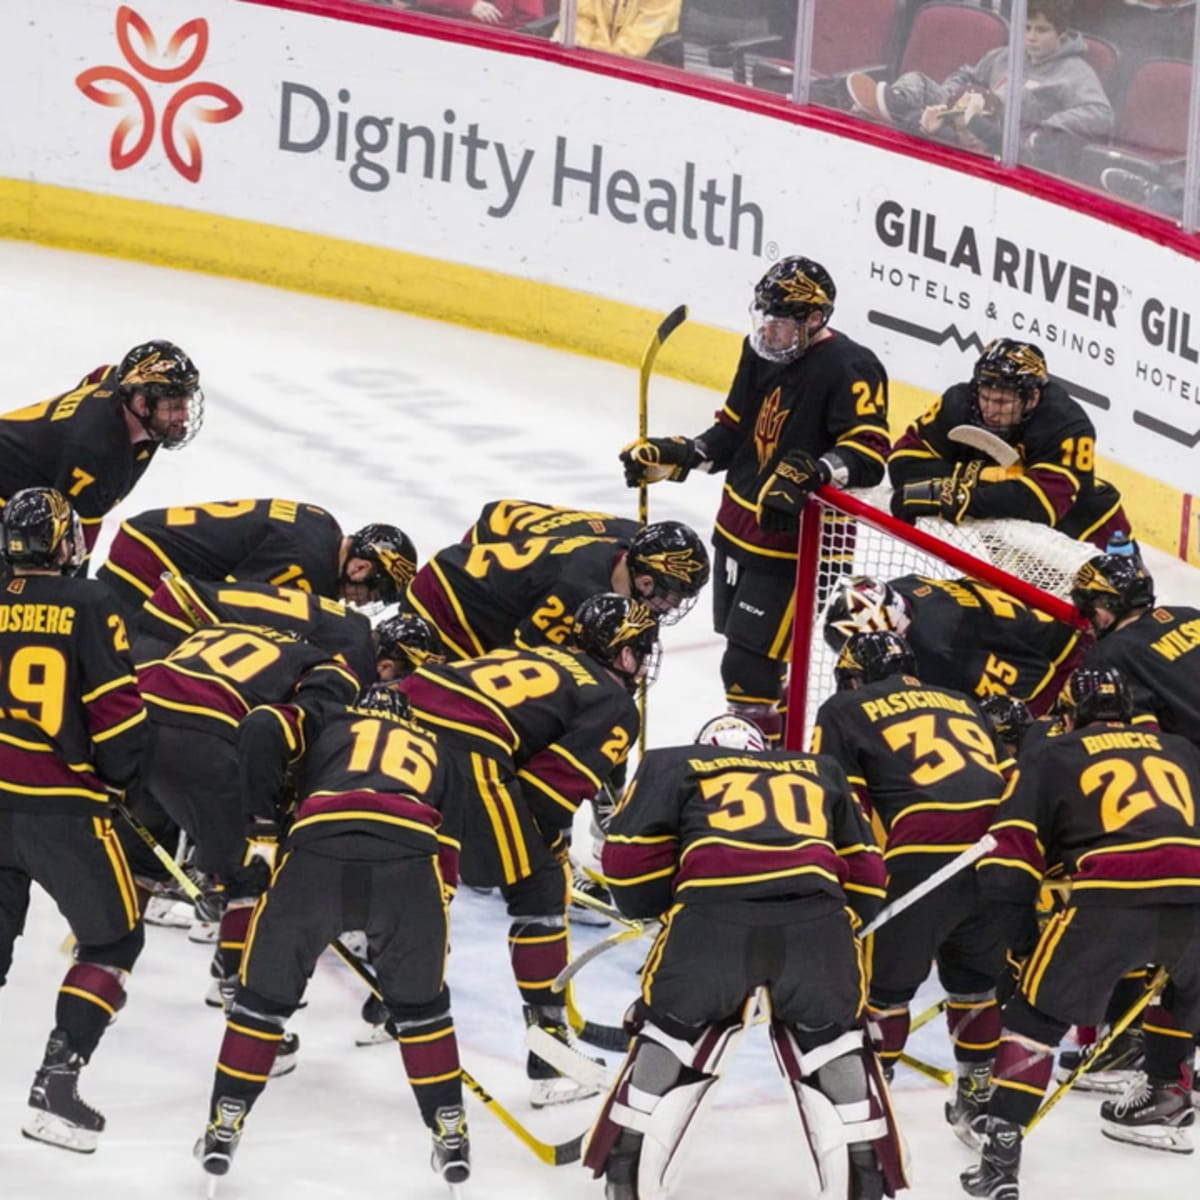 ASU Hockey: Sun Devils fall in game two against Omaha - House of Sparky